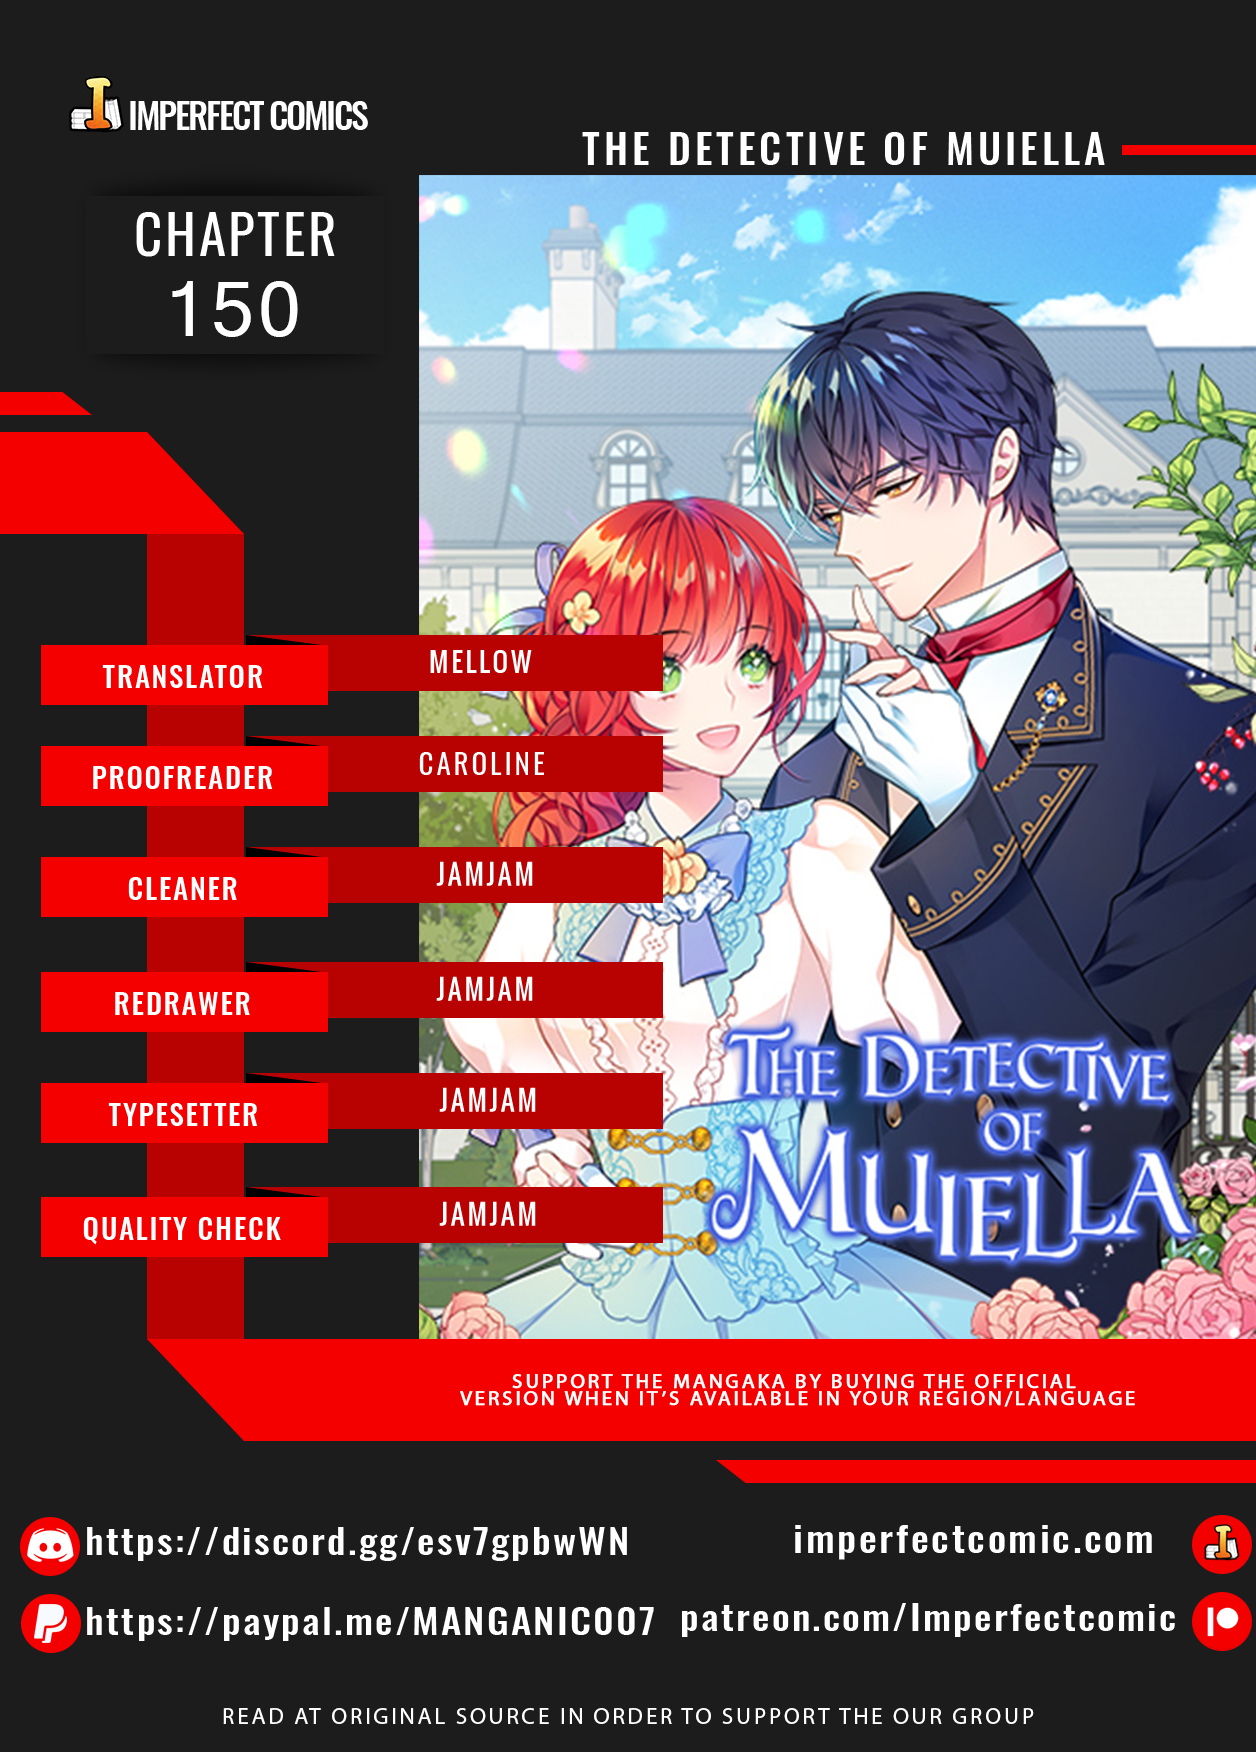 The Detective Of Muiella Chapter 150